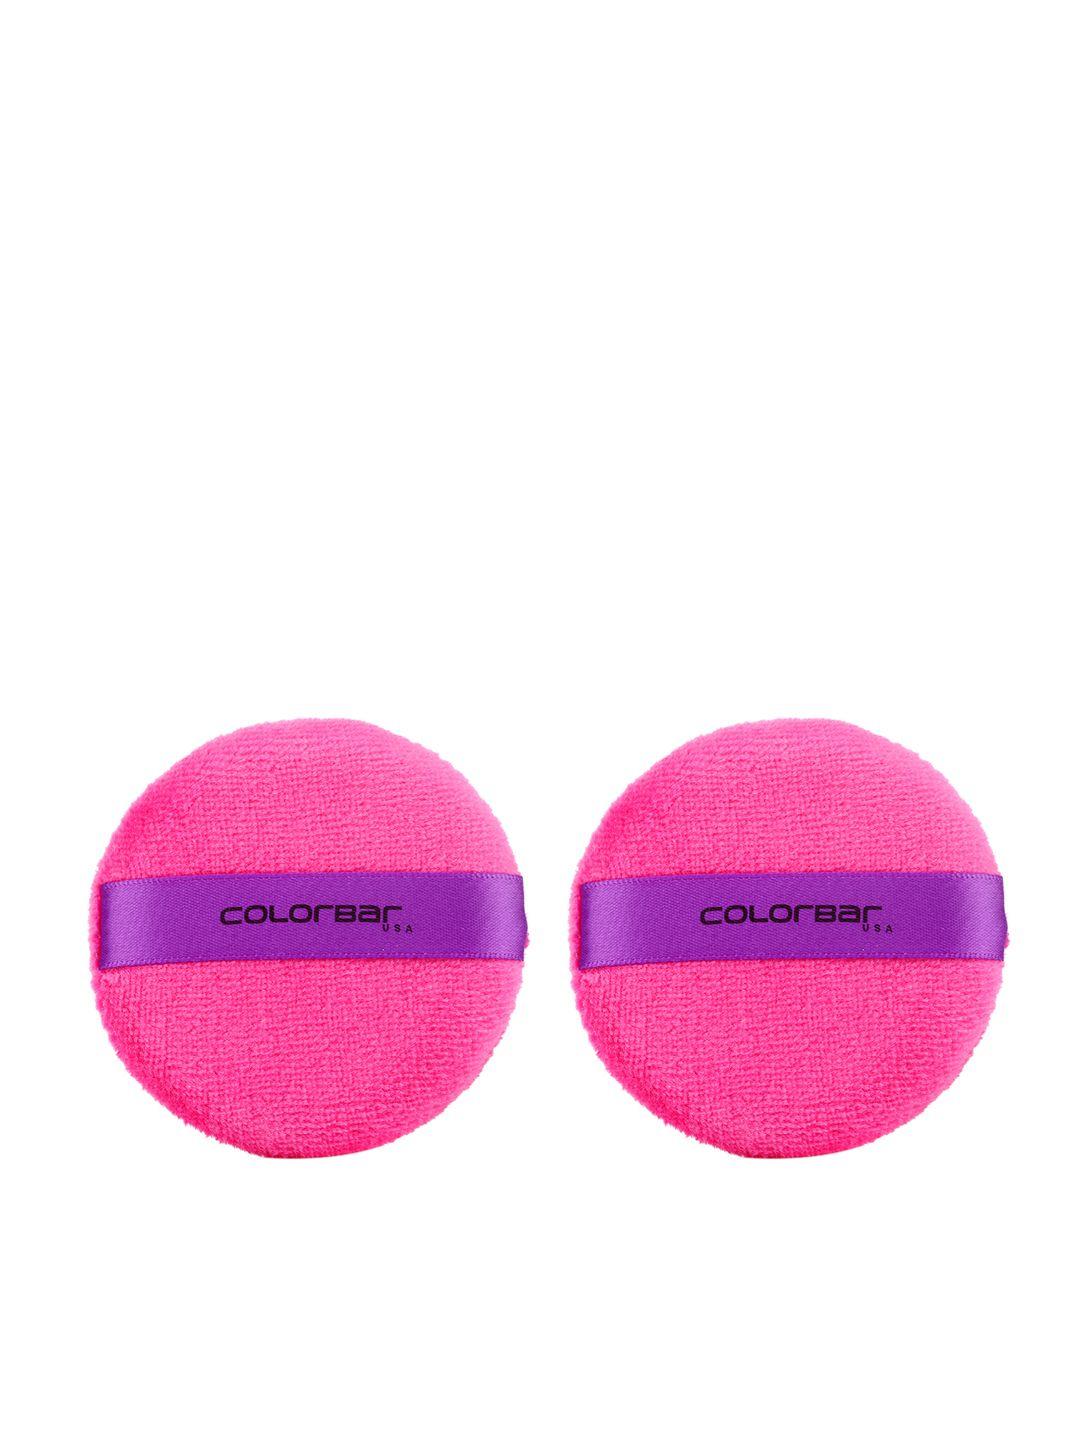 colorbar pink set of 2 over the top powder puffs